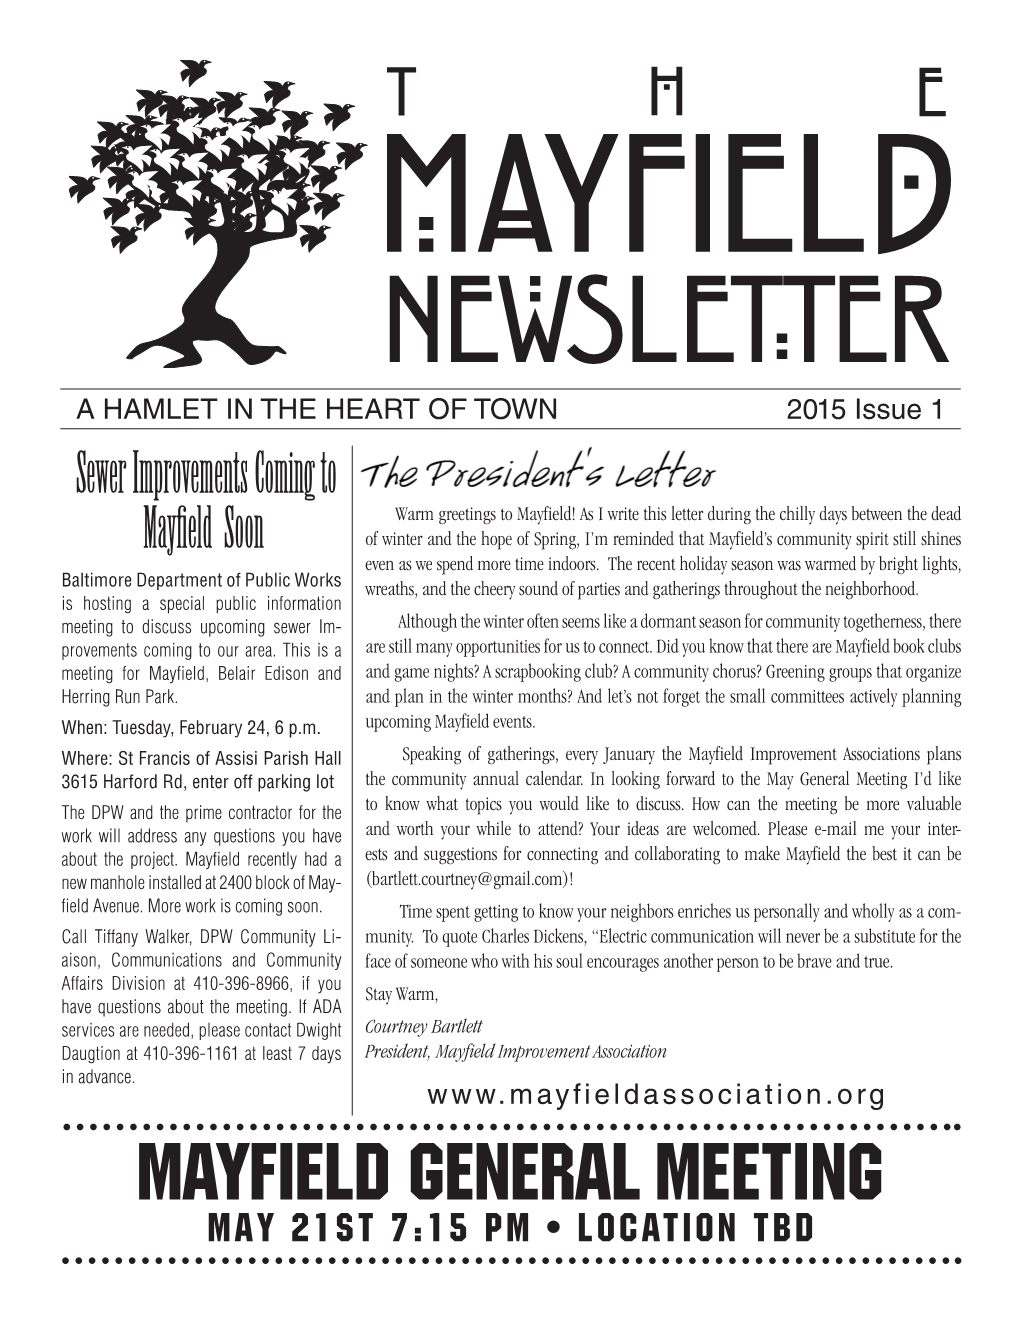 MAYFIELD GENERAL MEETING May 21St 7:15 PM • LOCATION TBD Tion Next Month on the Friends of Herring Run Herring Run Park Is a Forested Treasure in the Park Website